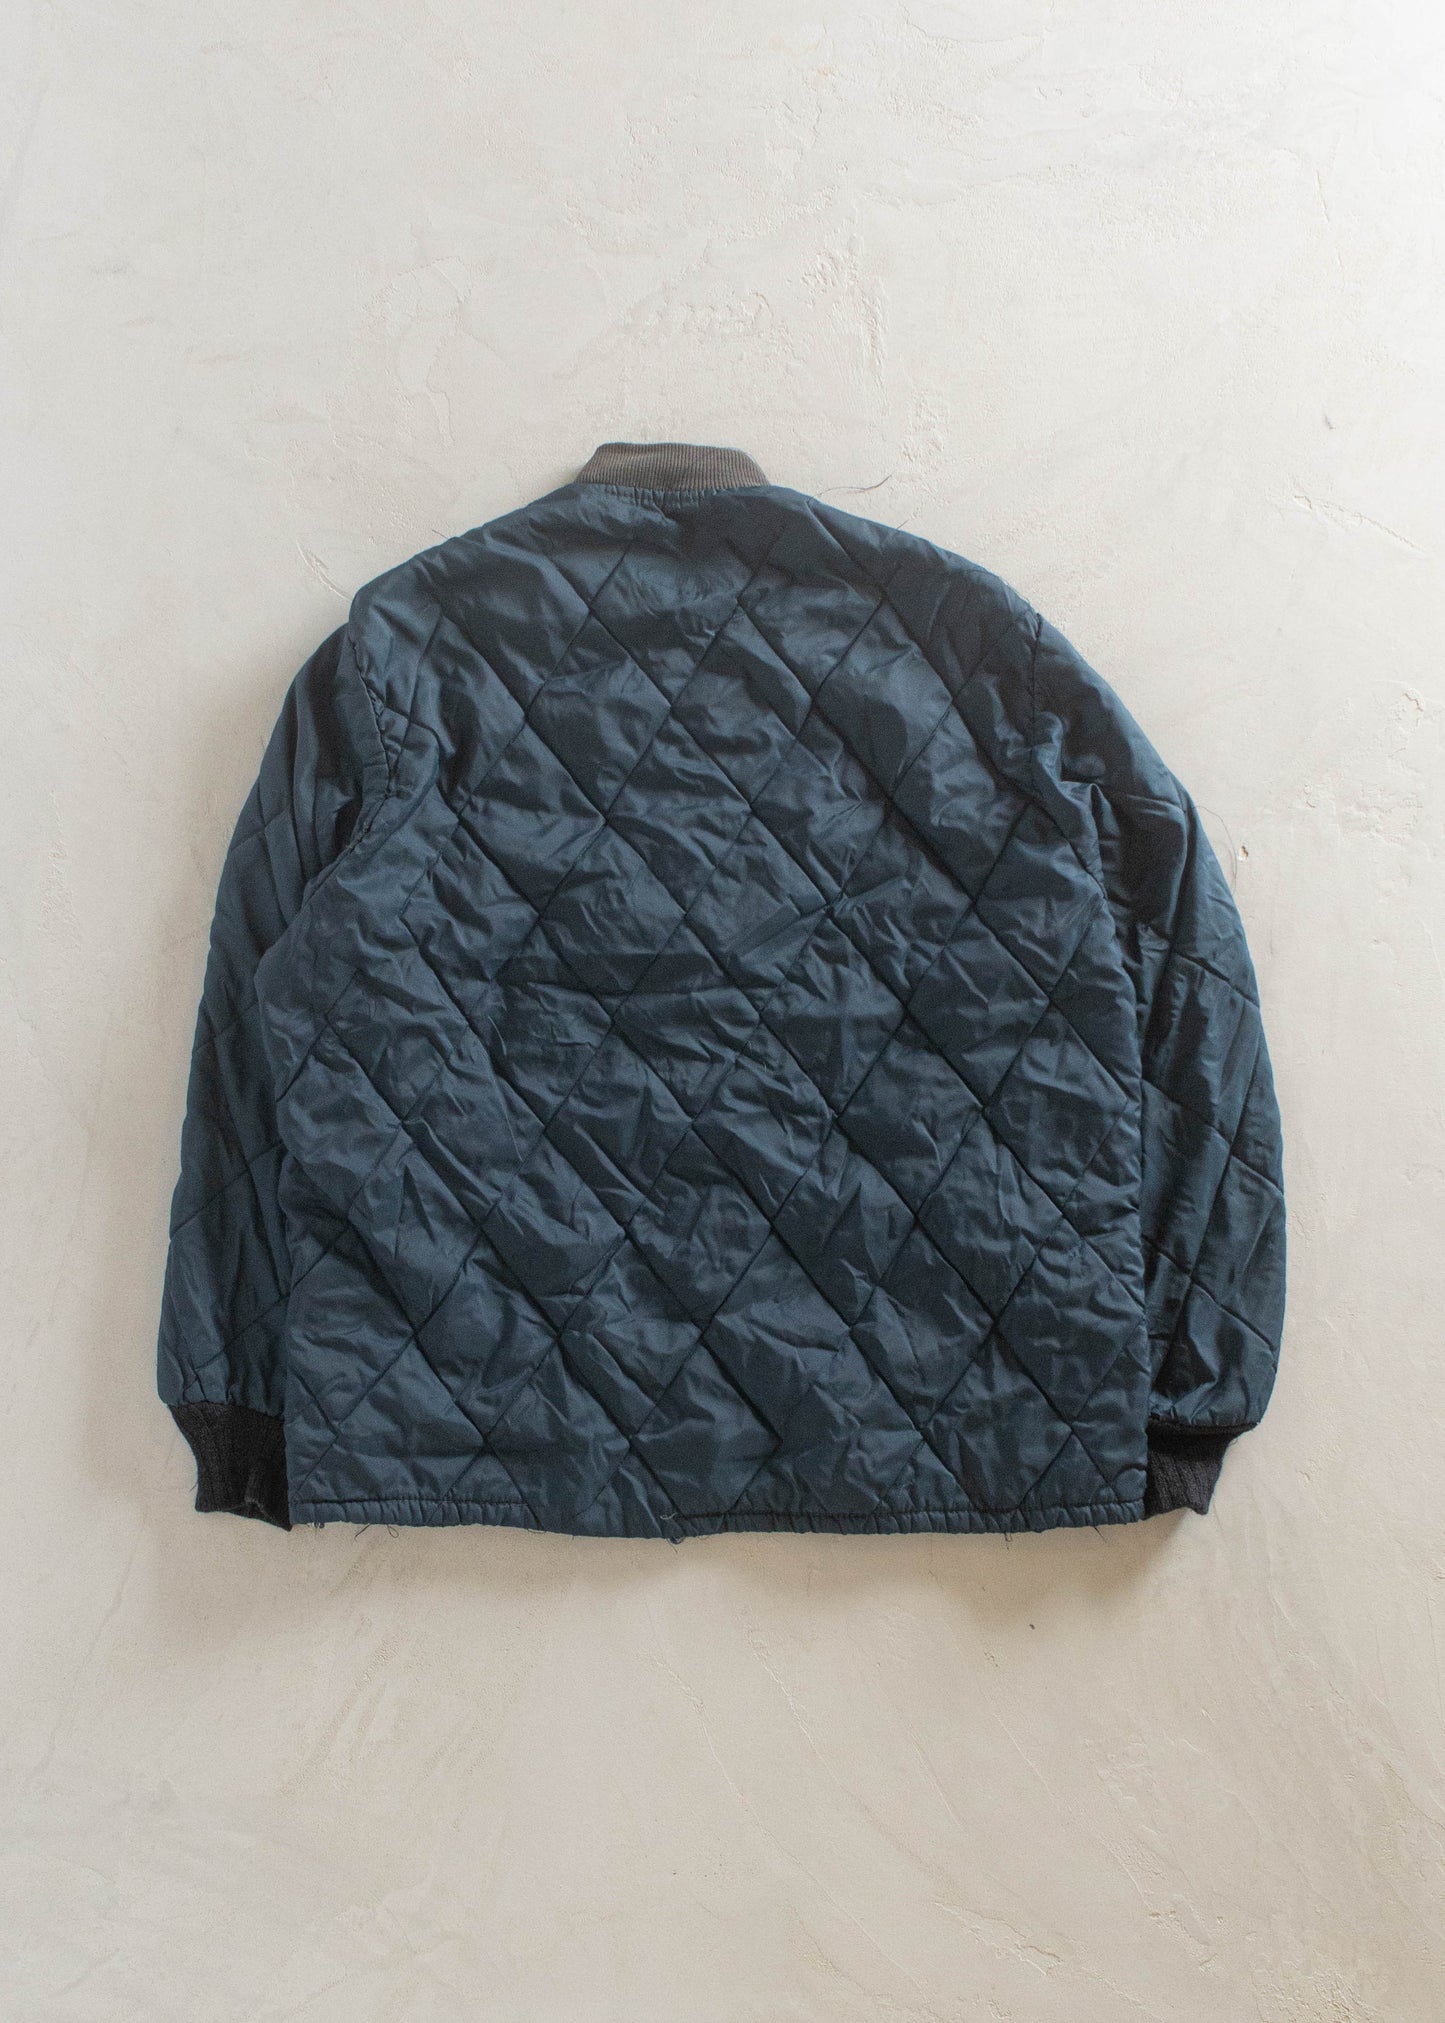 1980s Quilted Liner Jacket Size XS/S